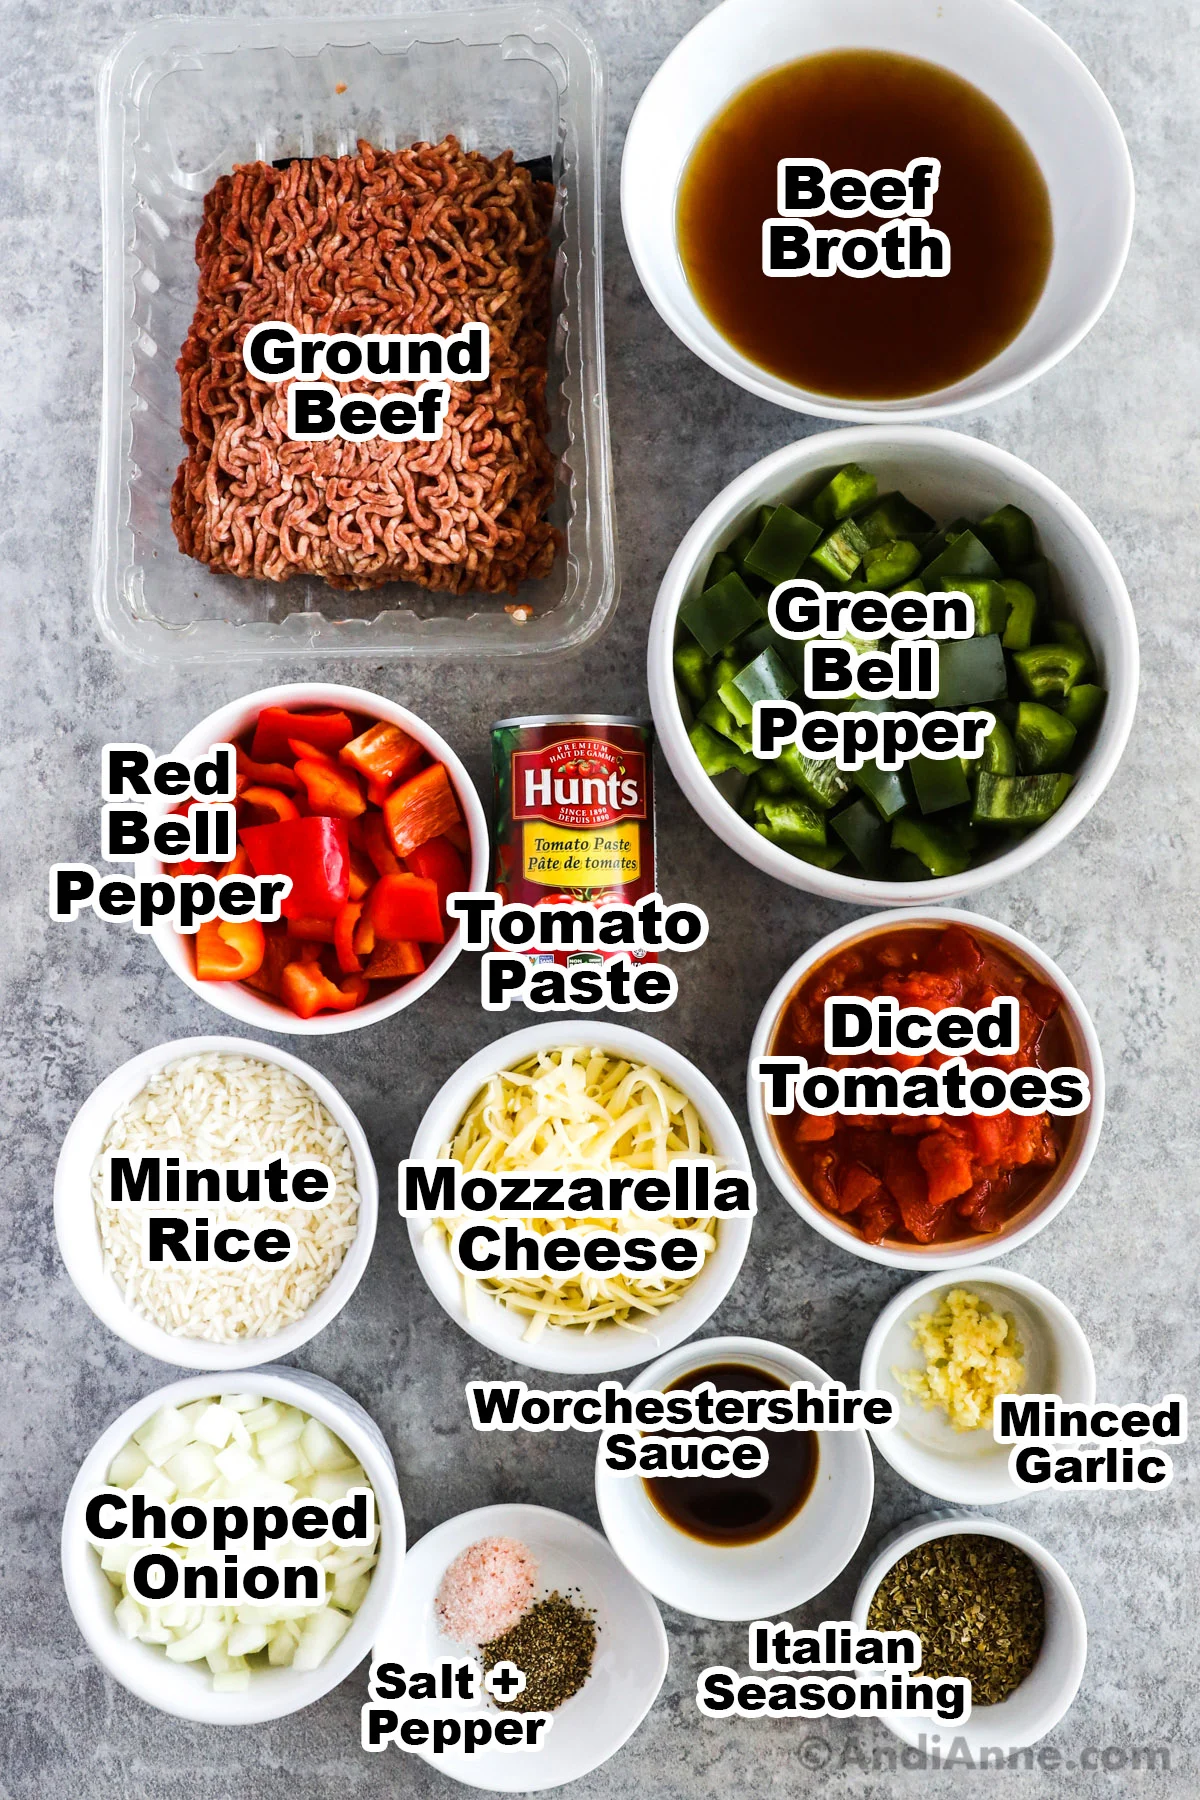 Recipe ingredients including raw ground beef, bowl of beef broth, bell peppers, diced tomatoes, cheese, seasonings, and onion.